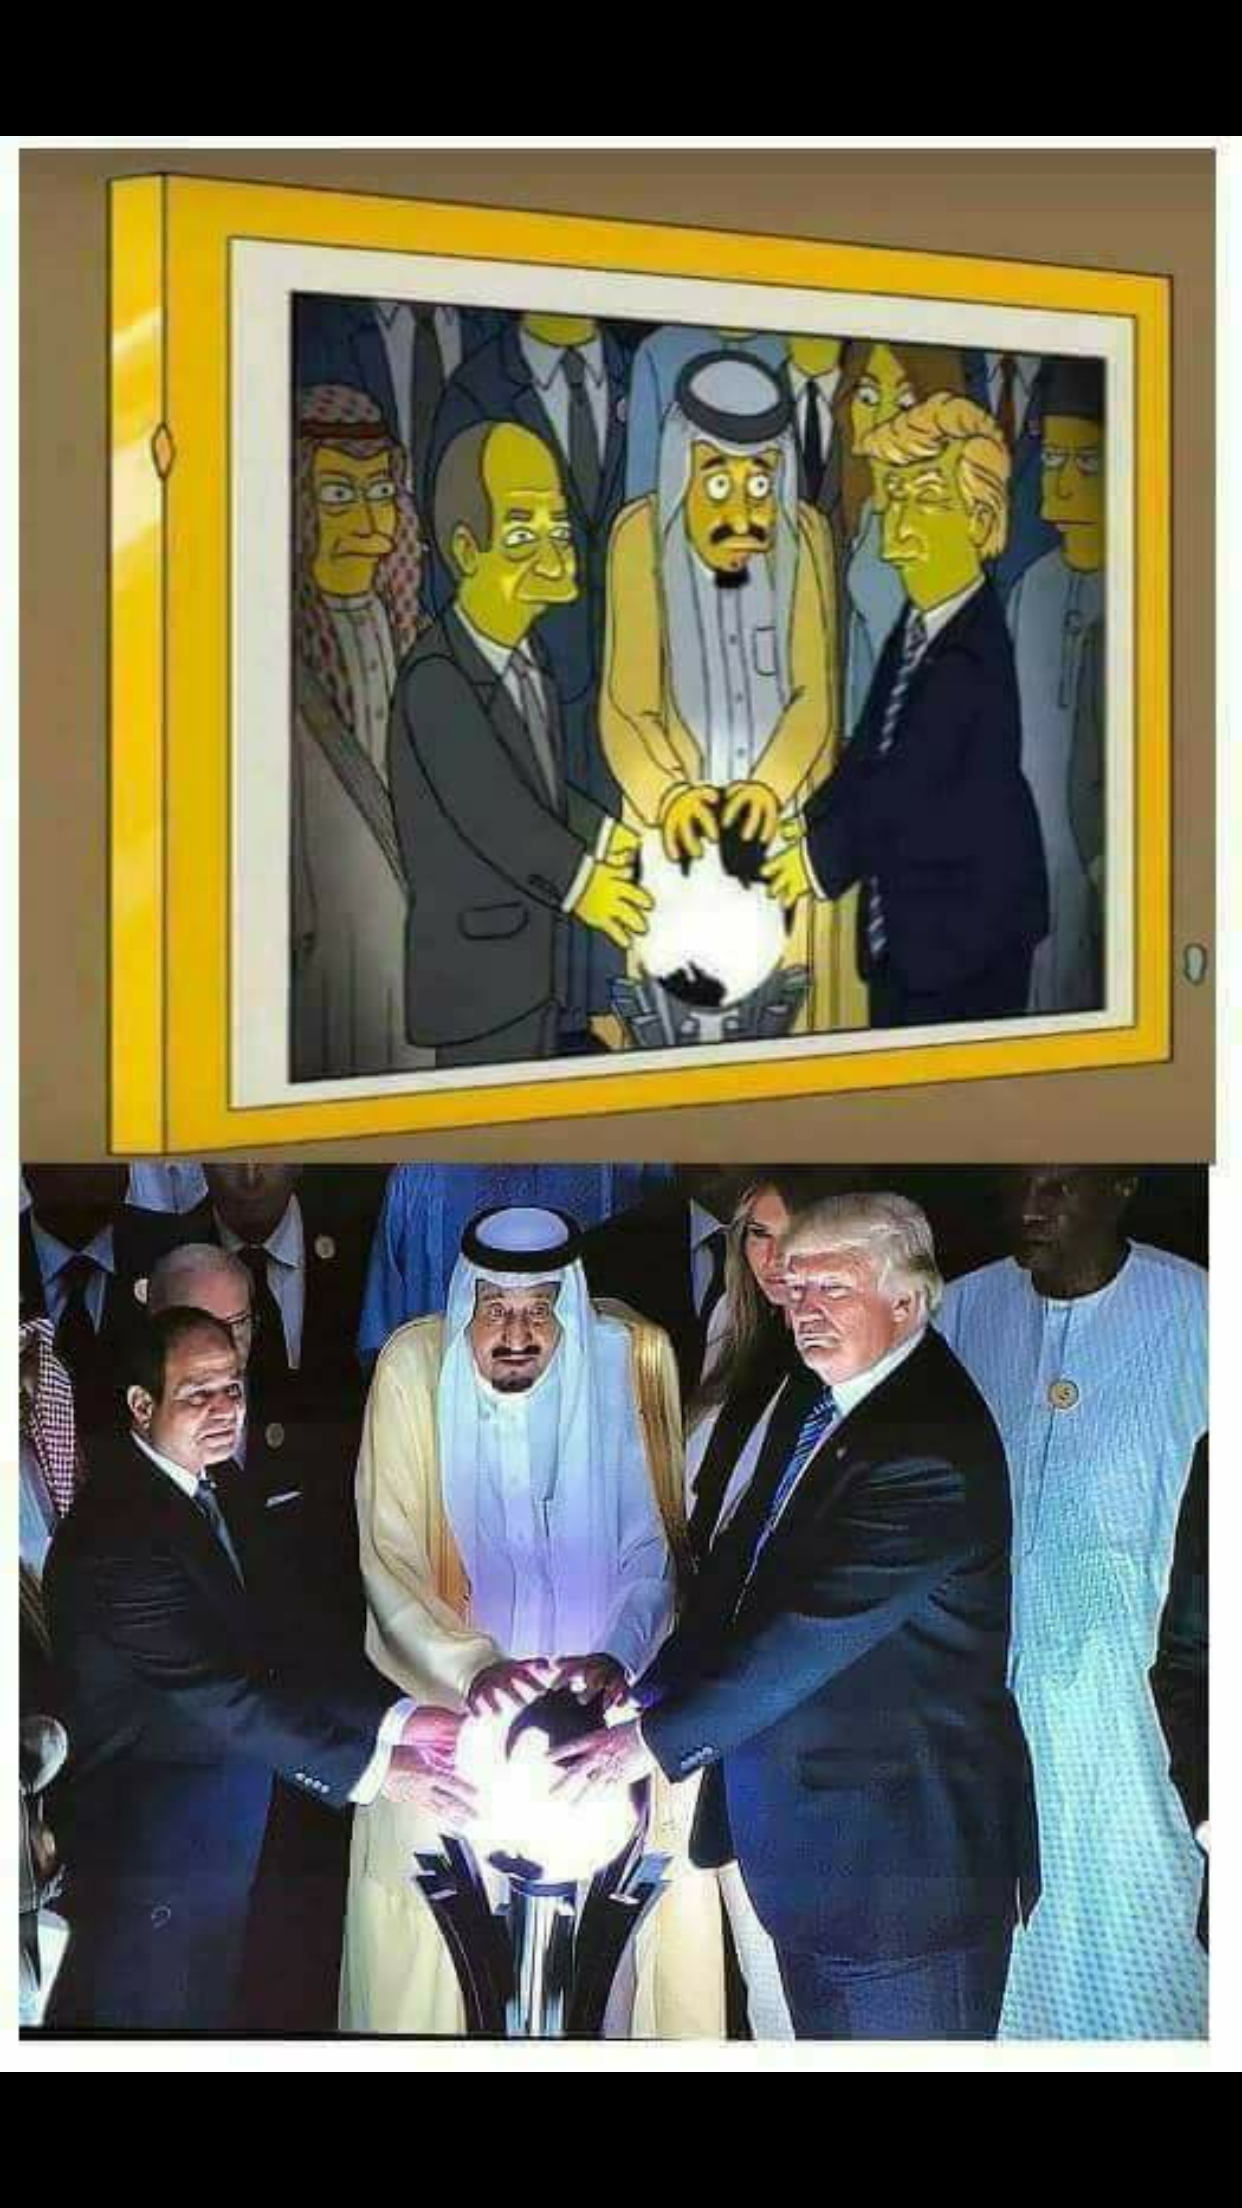 Trump's recent meeting with the King of Saudi Arabia depicted in the Simpsons